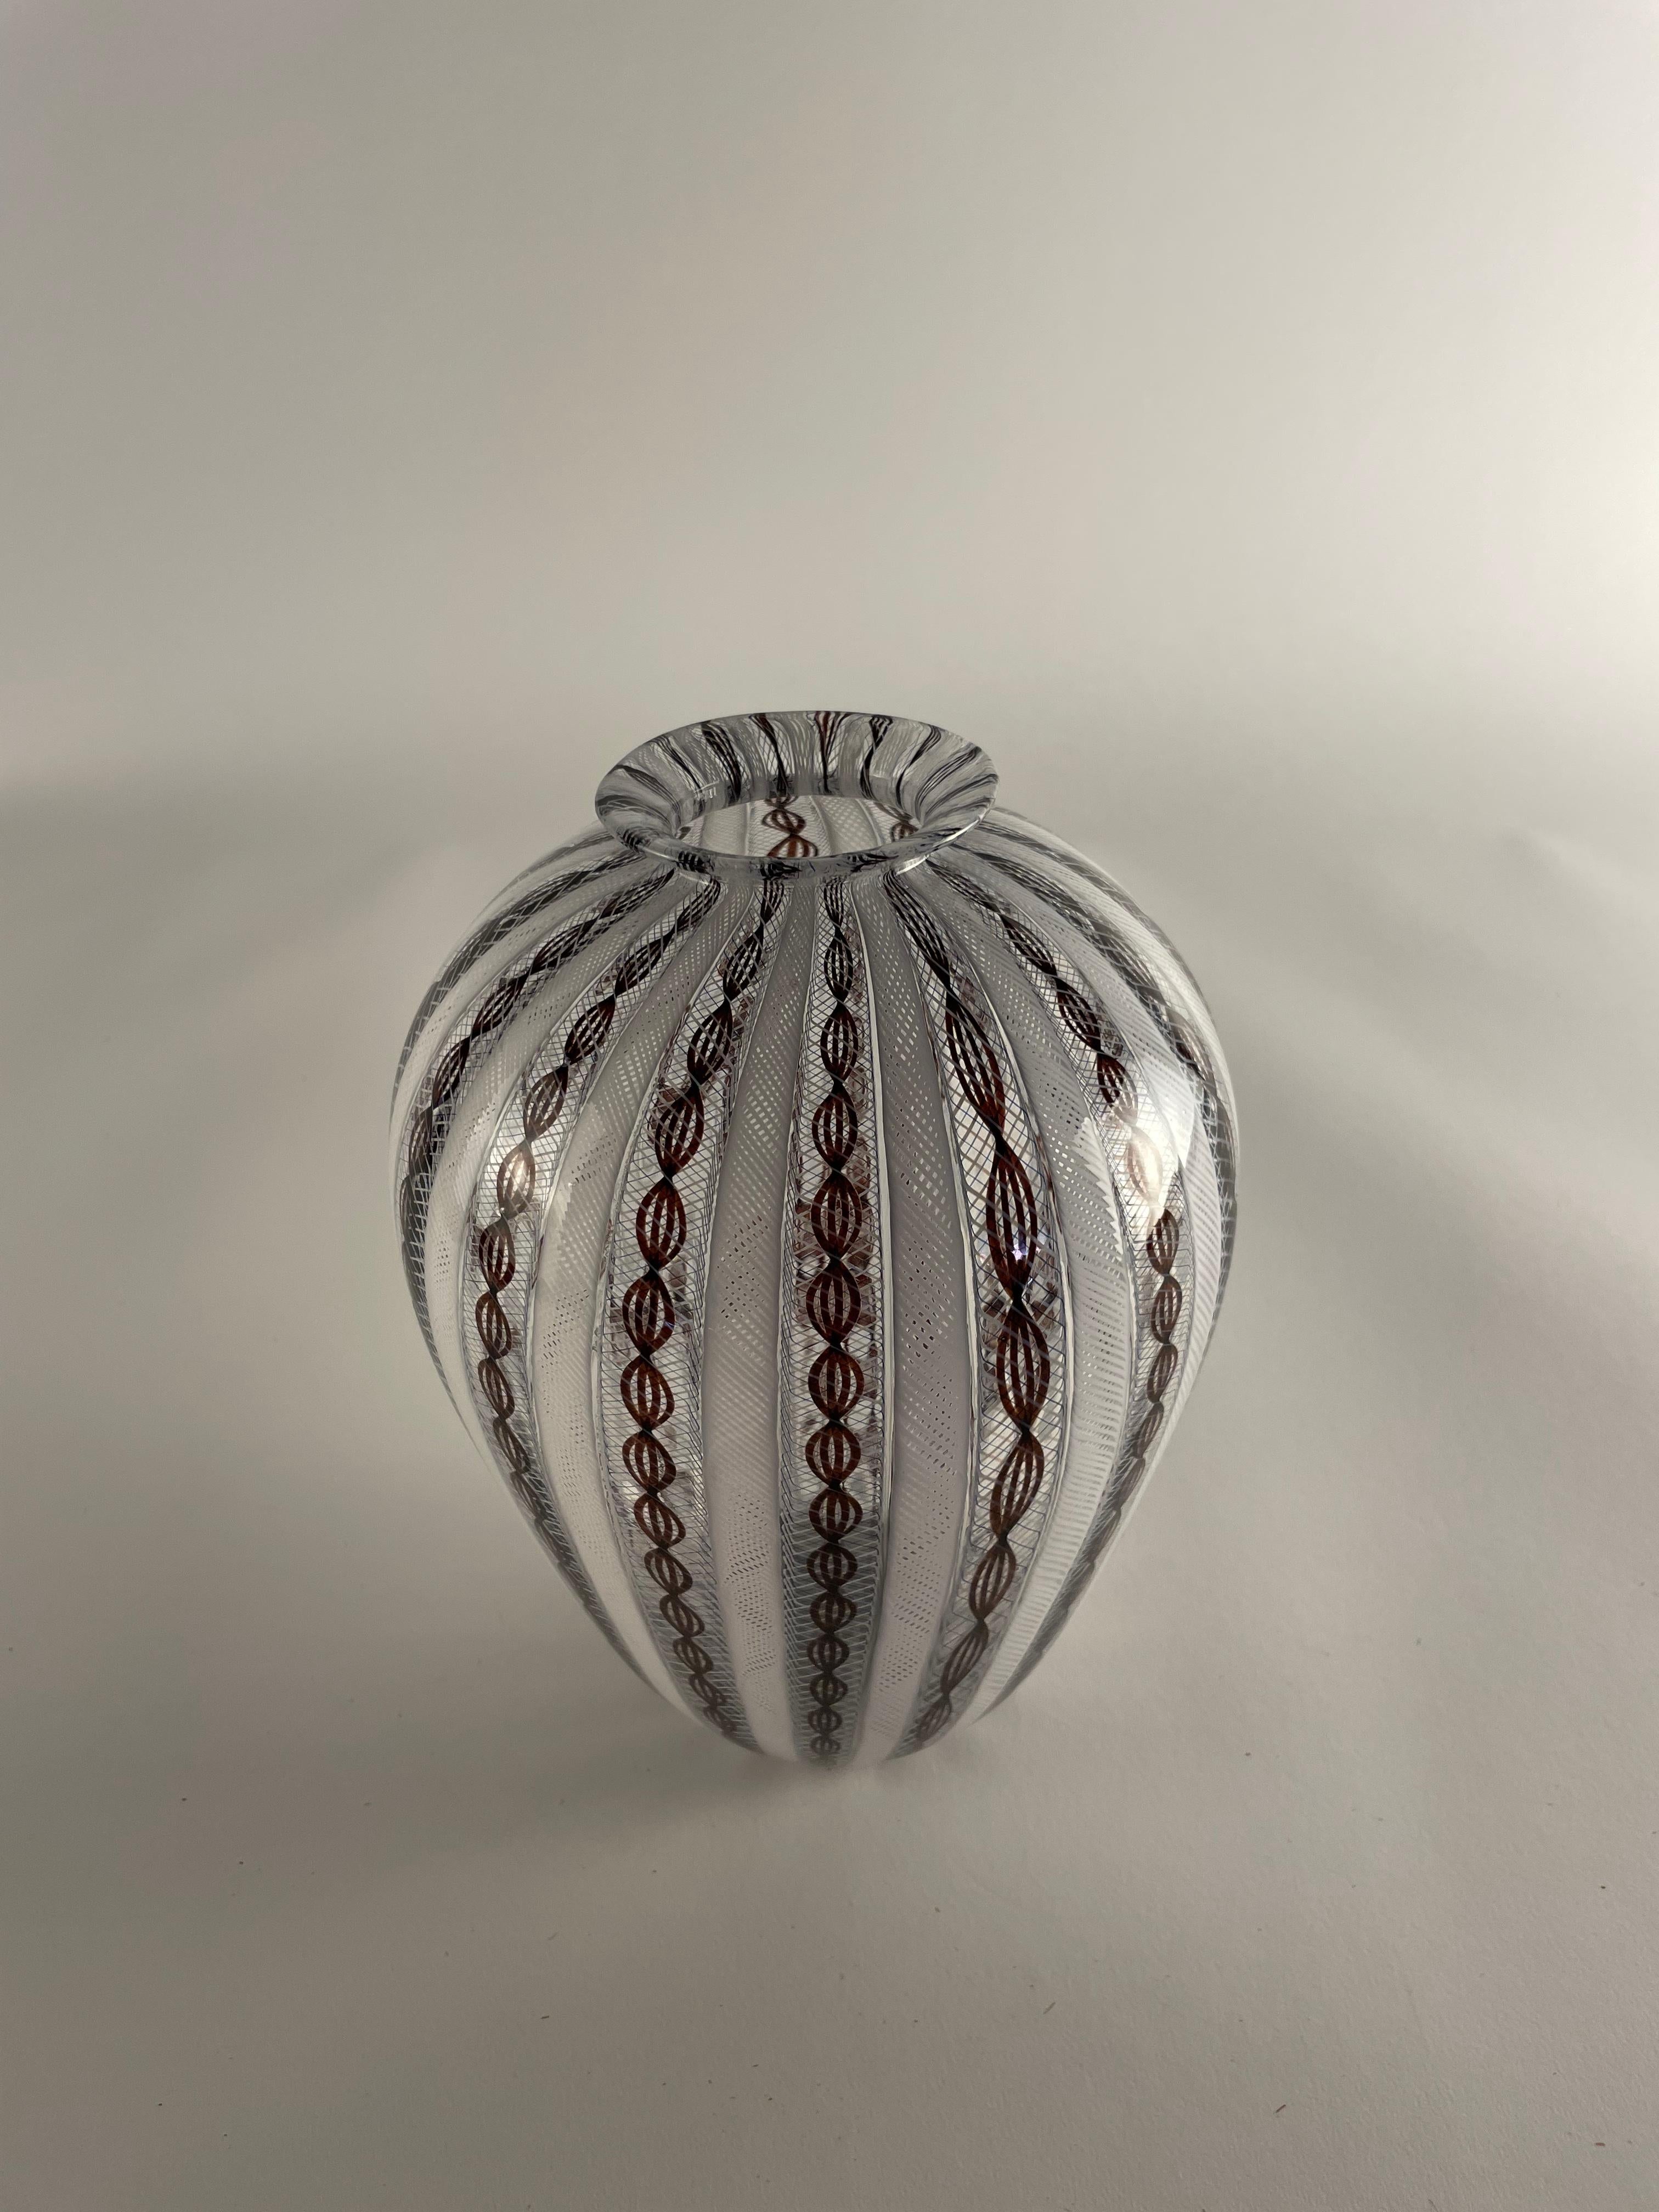 Introducing ZANFIRICO, a masterpiece of Murano glass craftsmanship. This exquisite vase showcases the artistry of canne zanfirico, a complex technique that intertwines multiple glass threads to create a mesmerizing lace-like pattern. Only the most